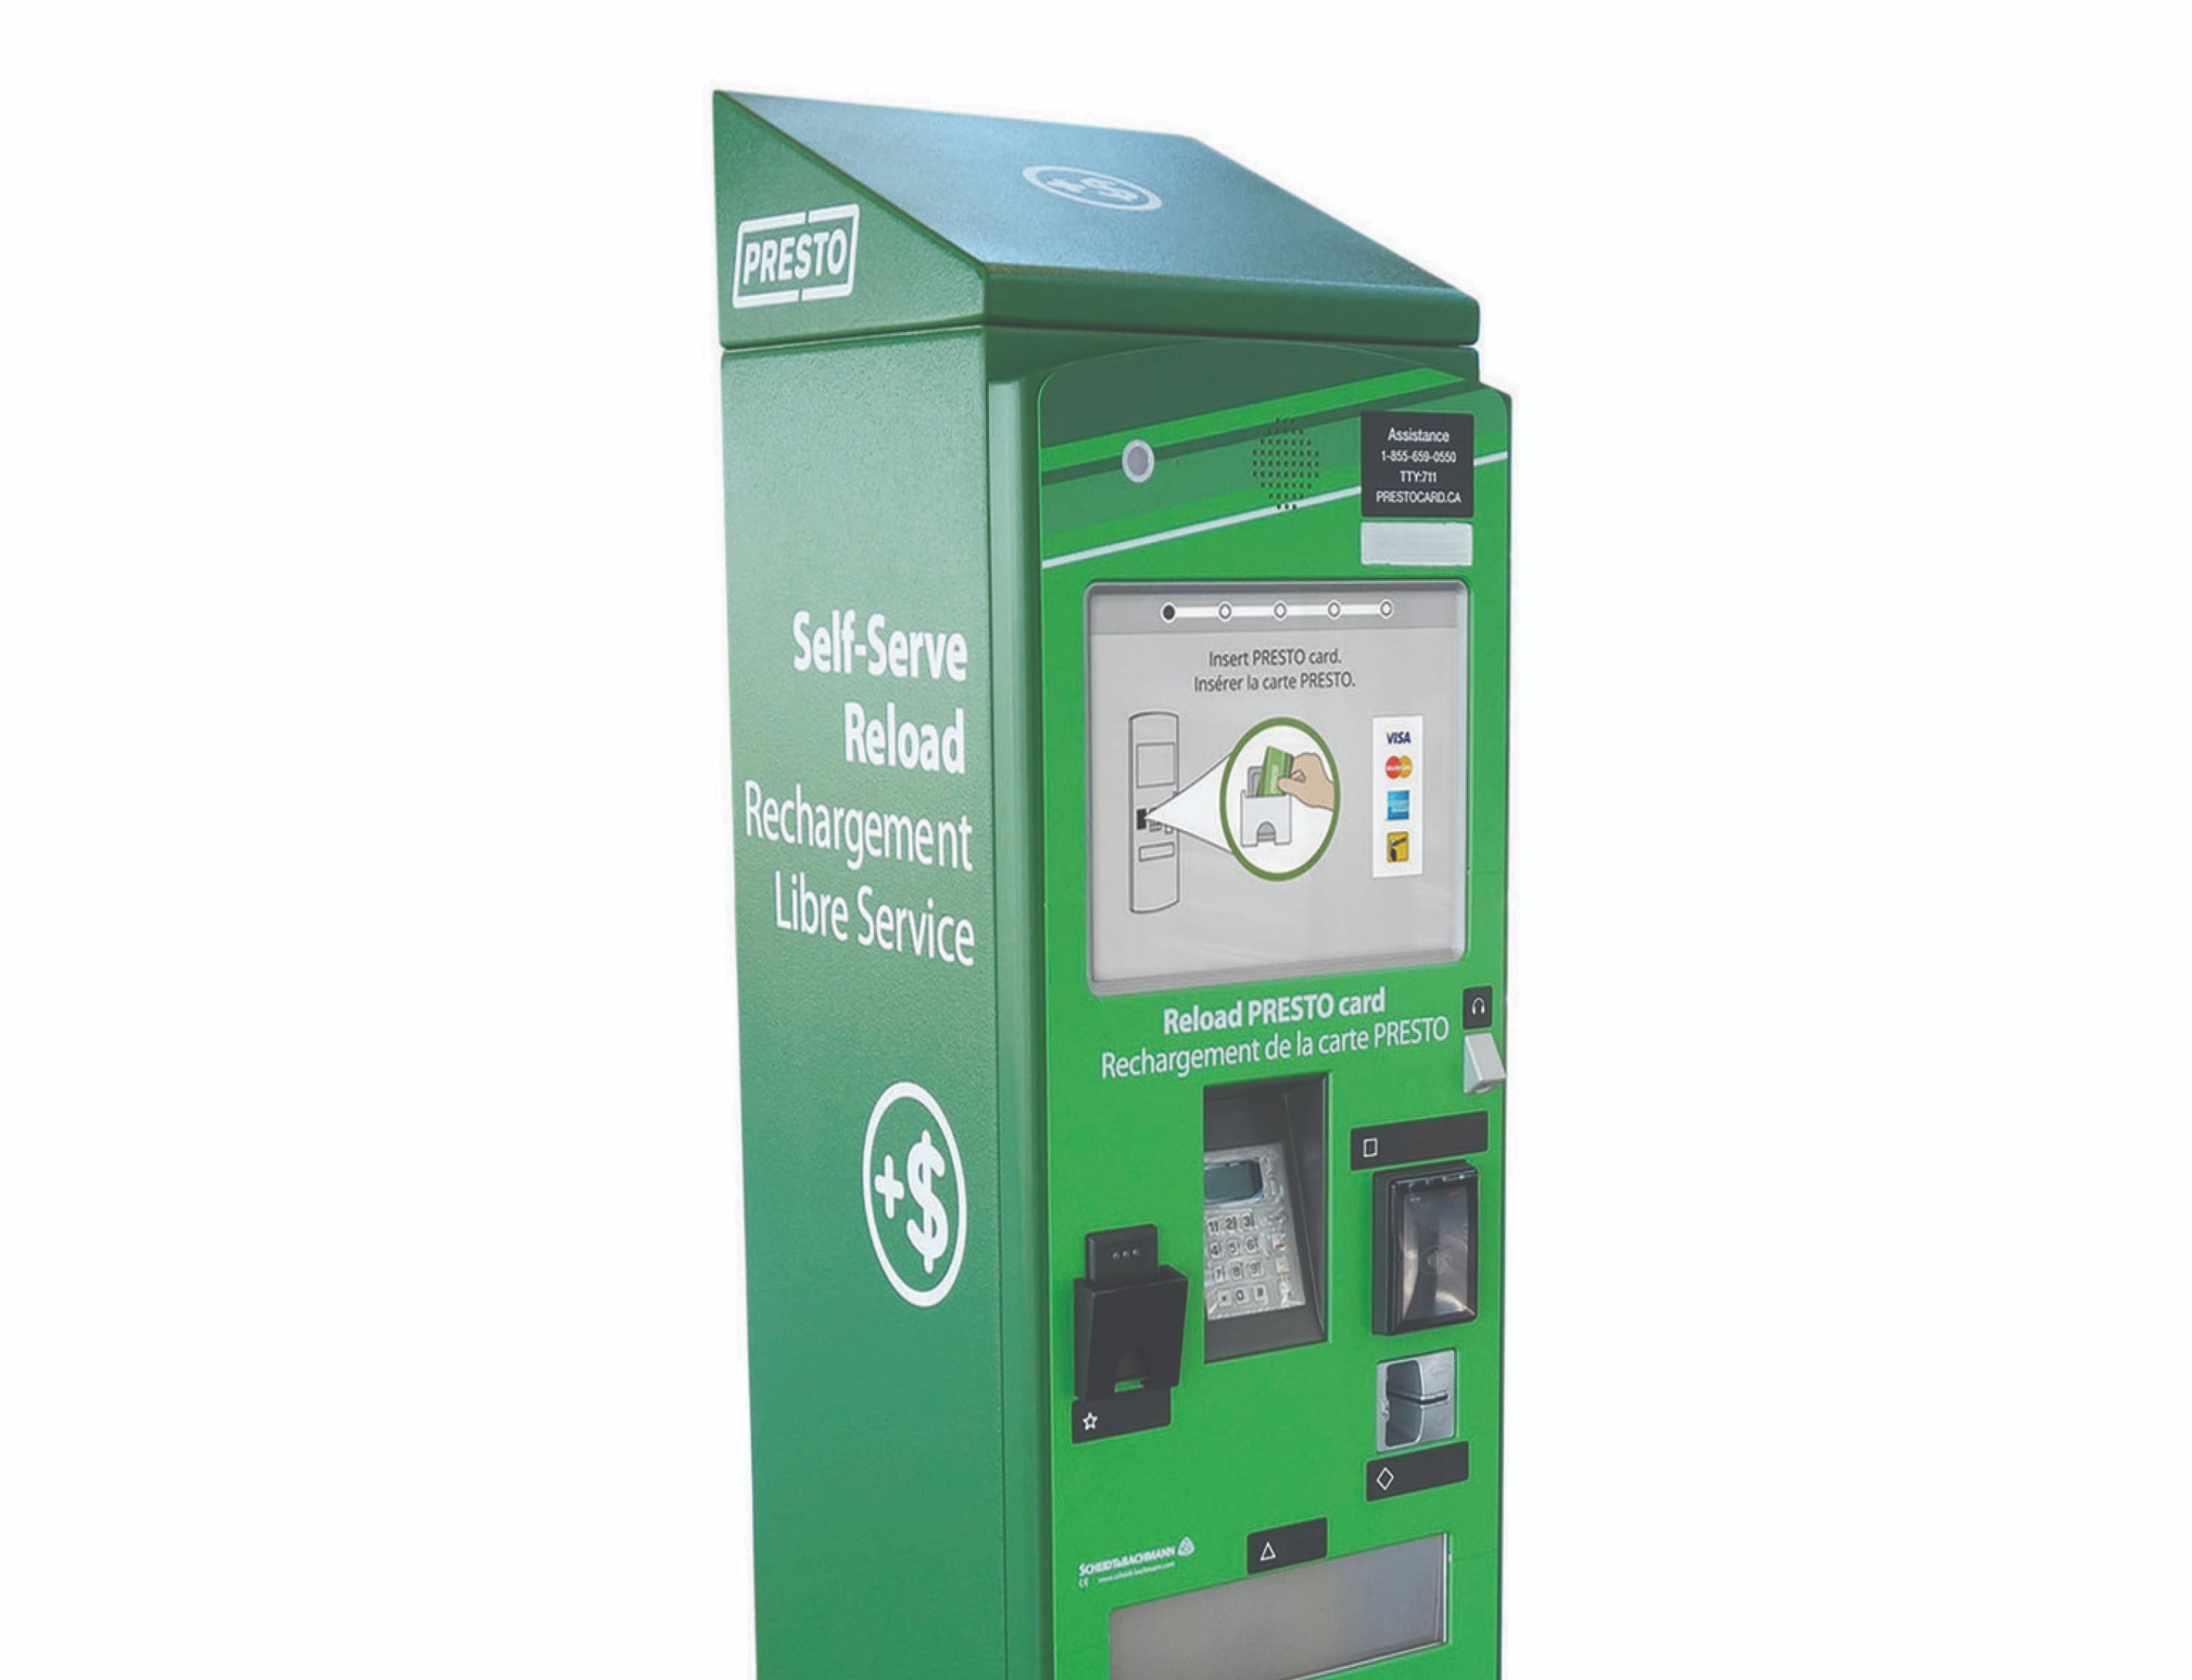 Use a Self-Serve Reload machine to load money onto your PRESTO card with a credit or debit card.